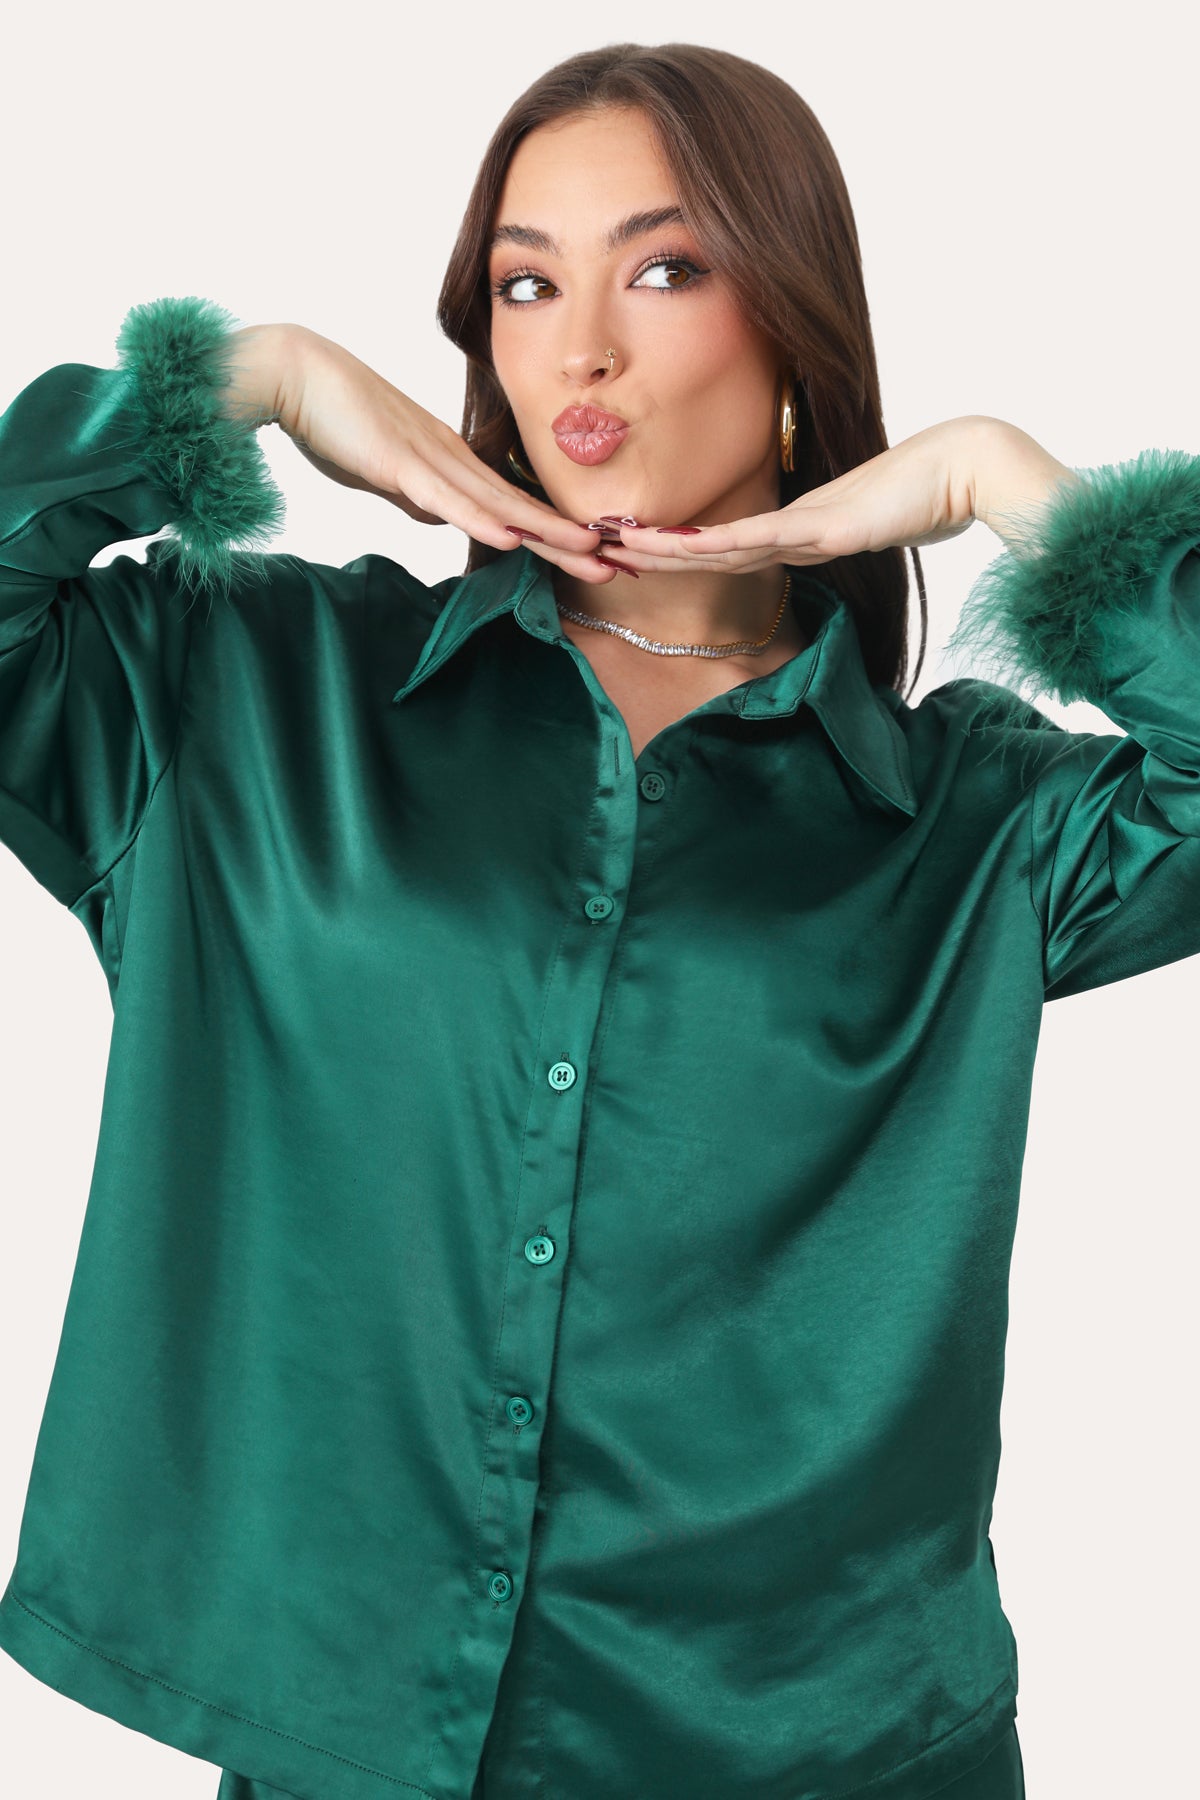 AFTER HOURS EMERALD GREEN SATIN BUTTON DOWN PJ TOP